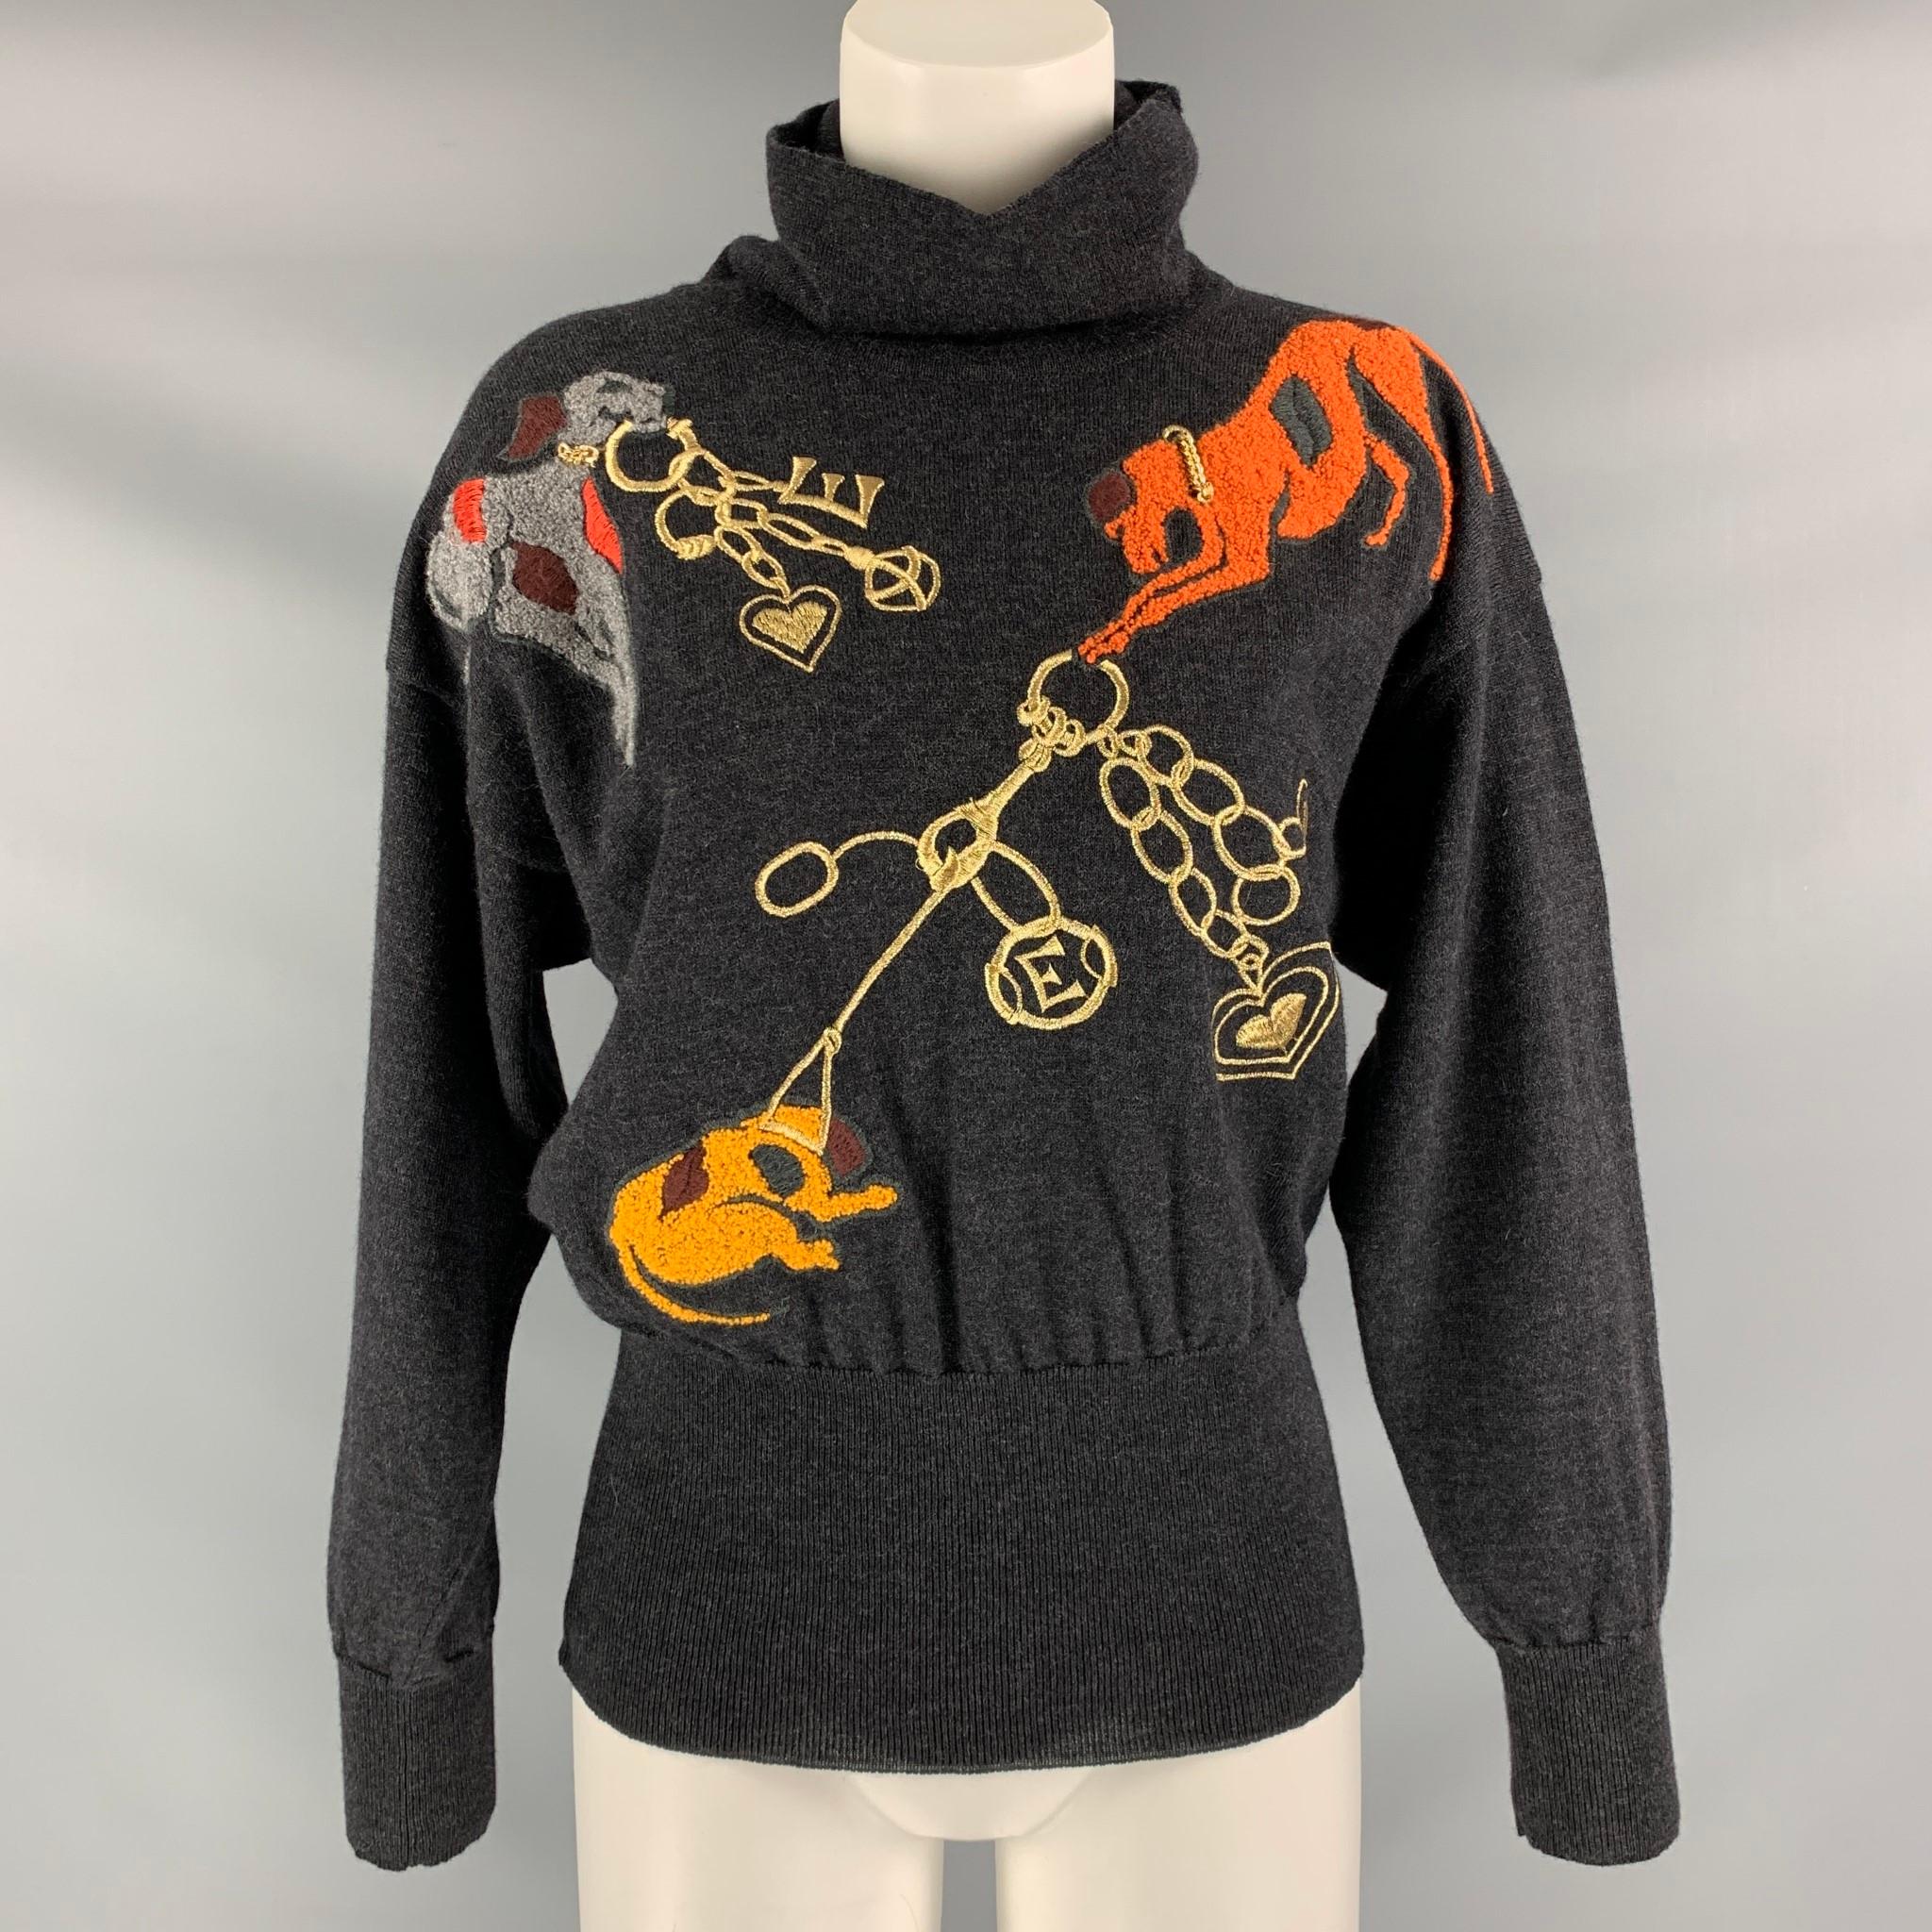 ESCADA drop shoulder turtleneck pullover comes in charcoal wool and features a gold tone chain with gray, orange and yellow dogs embroidered at front. Made in Italy.

Very Good Pre-Owned Condition. Minor hole has been fixed, approximately 1 cm at